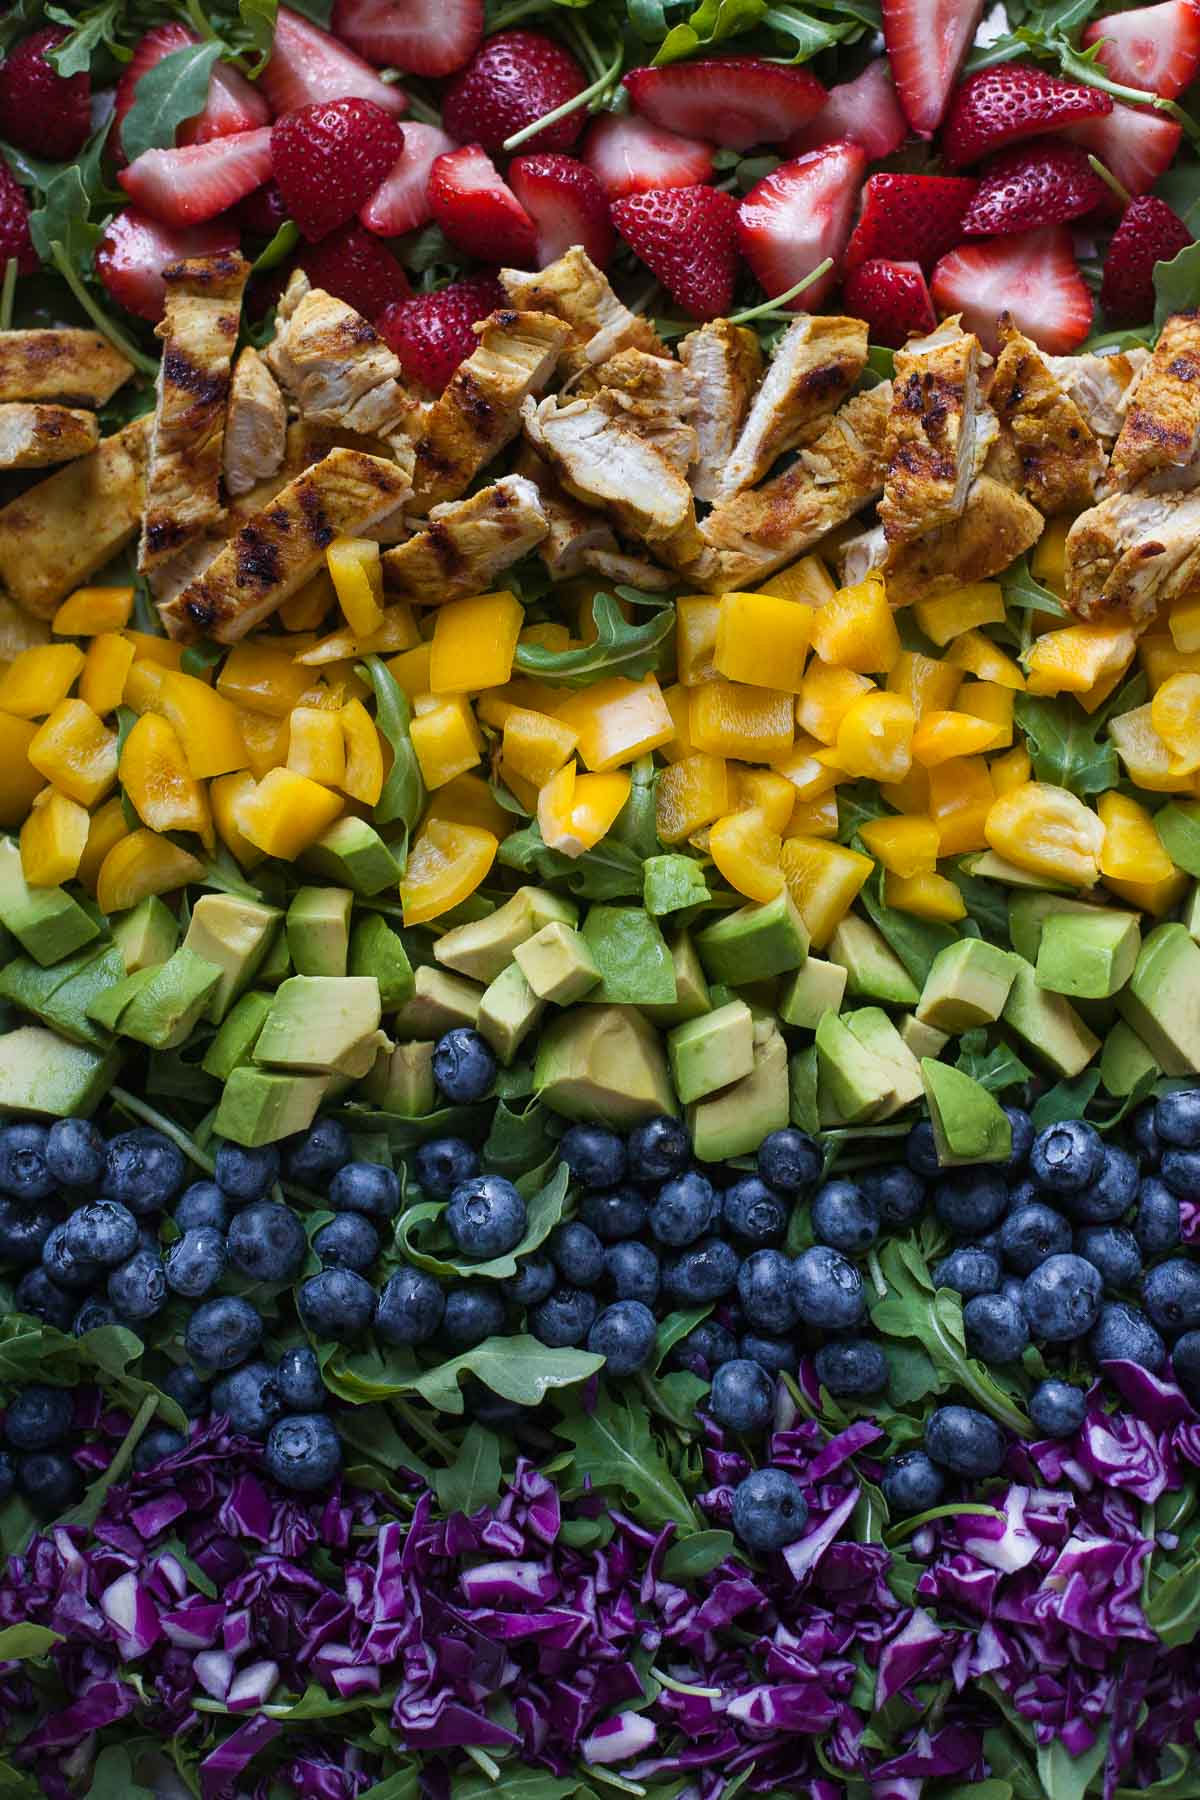 Rainbow Salad with Grilled Chicken and Raspberry Walnut Dressing #30MinuteMondays | acalculatedwhisk.com 